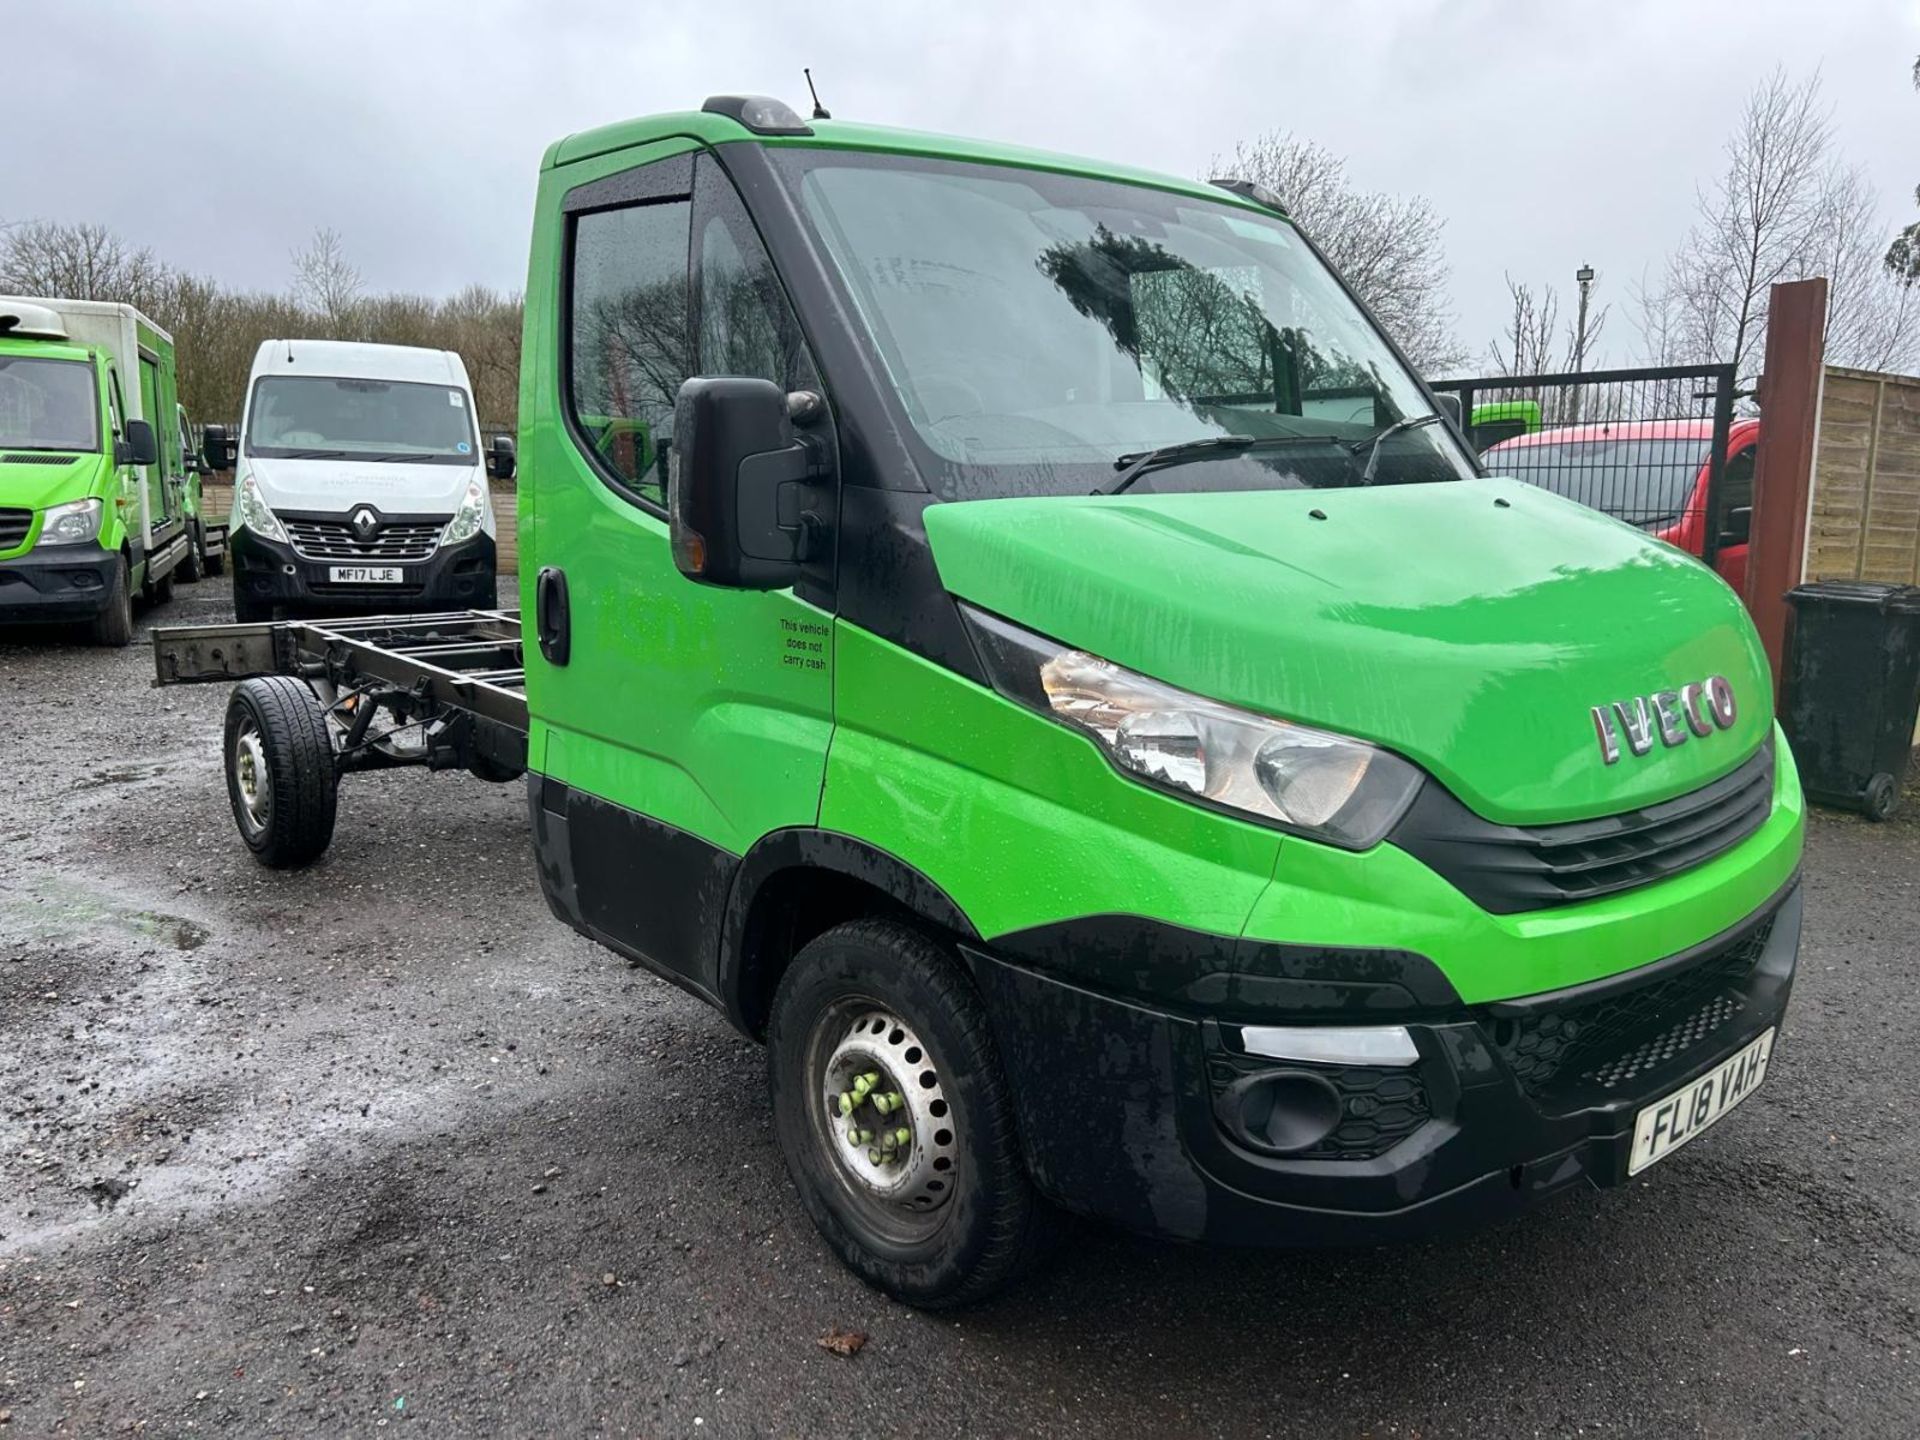 TOP-NOTCH TRANSPORTER: 2018 IVECO DAILY 35S12 DIESEL